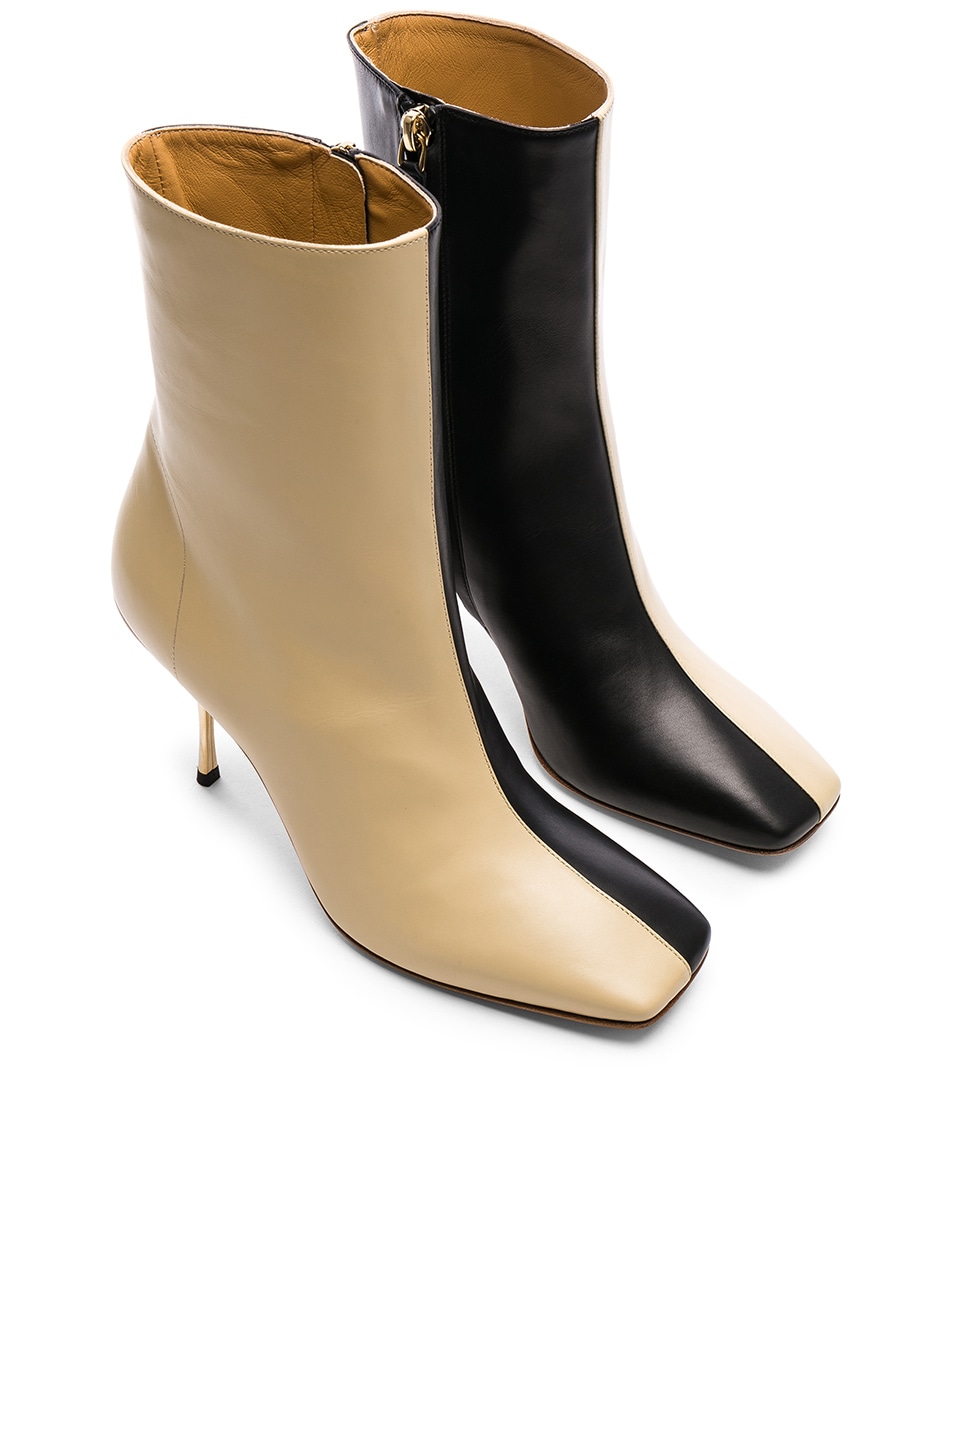 Image 1 of Petar Petrov Leather Svea Ankle Boots in Black, Beige & Gold